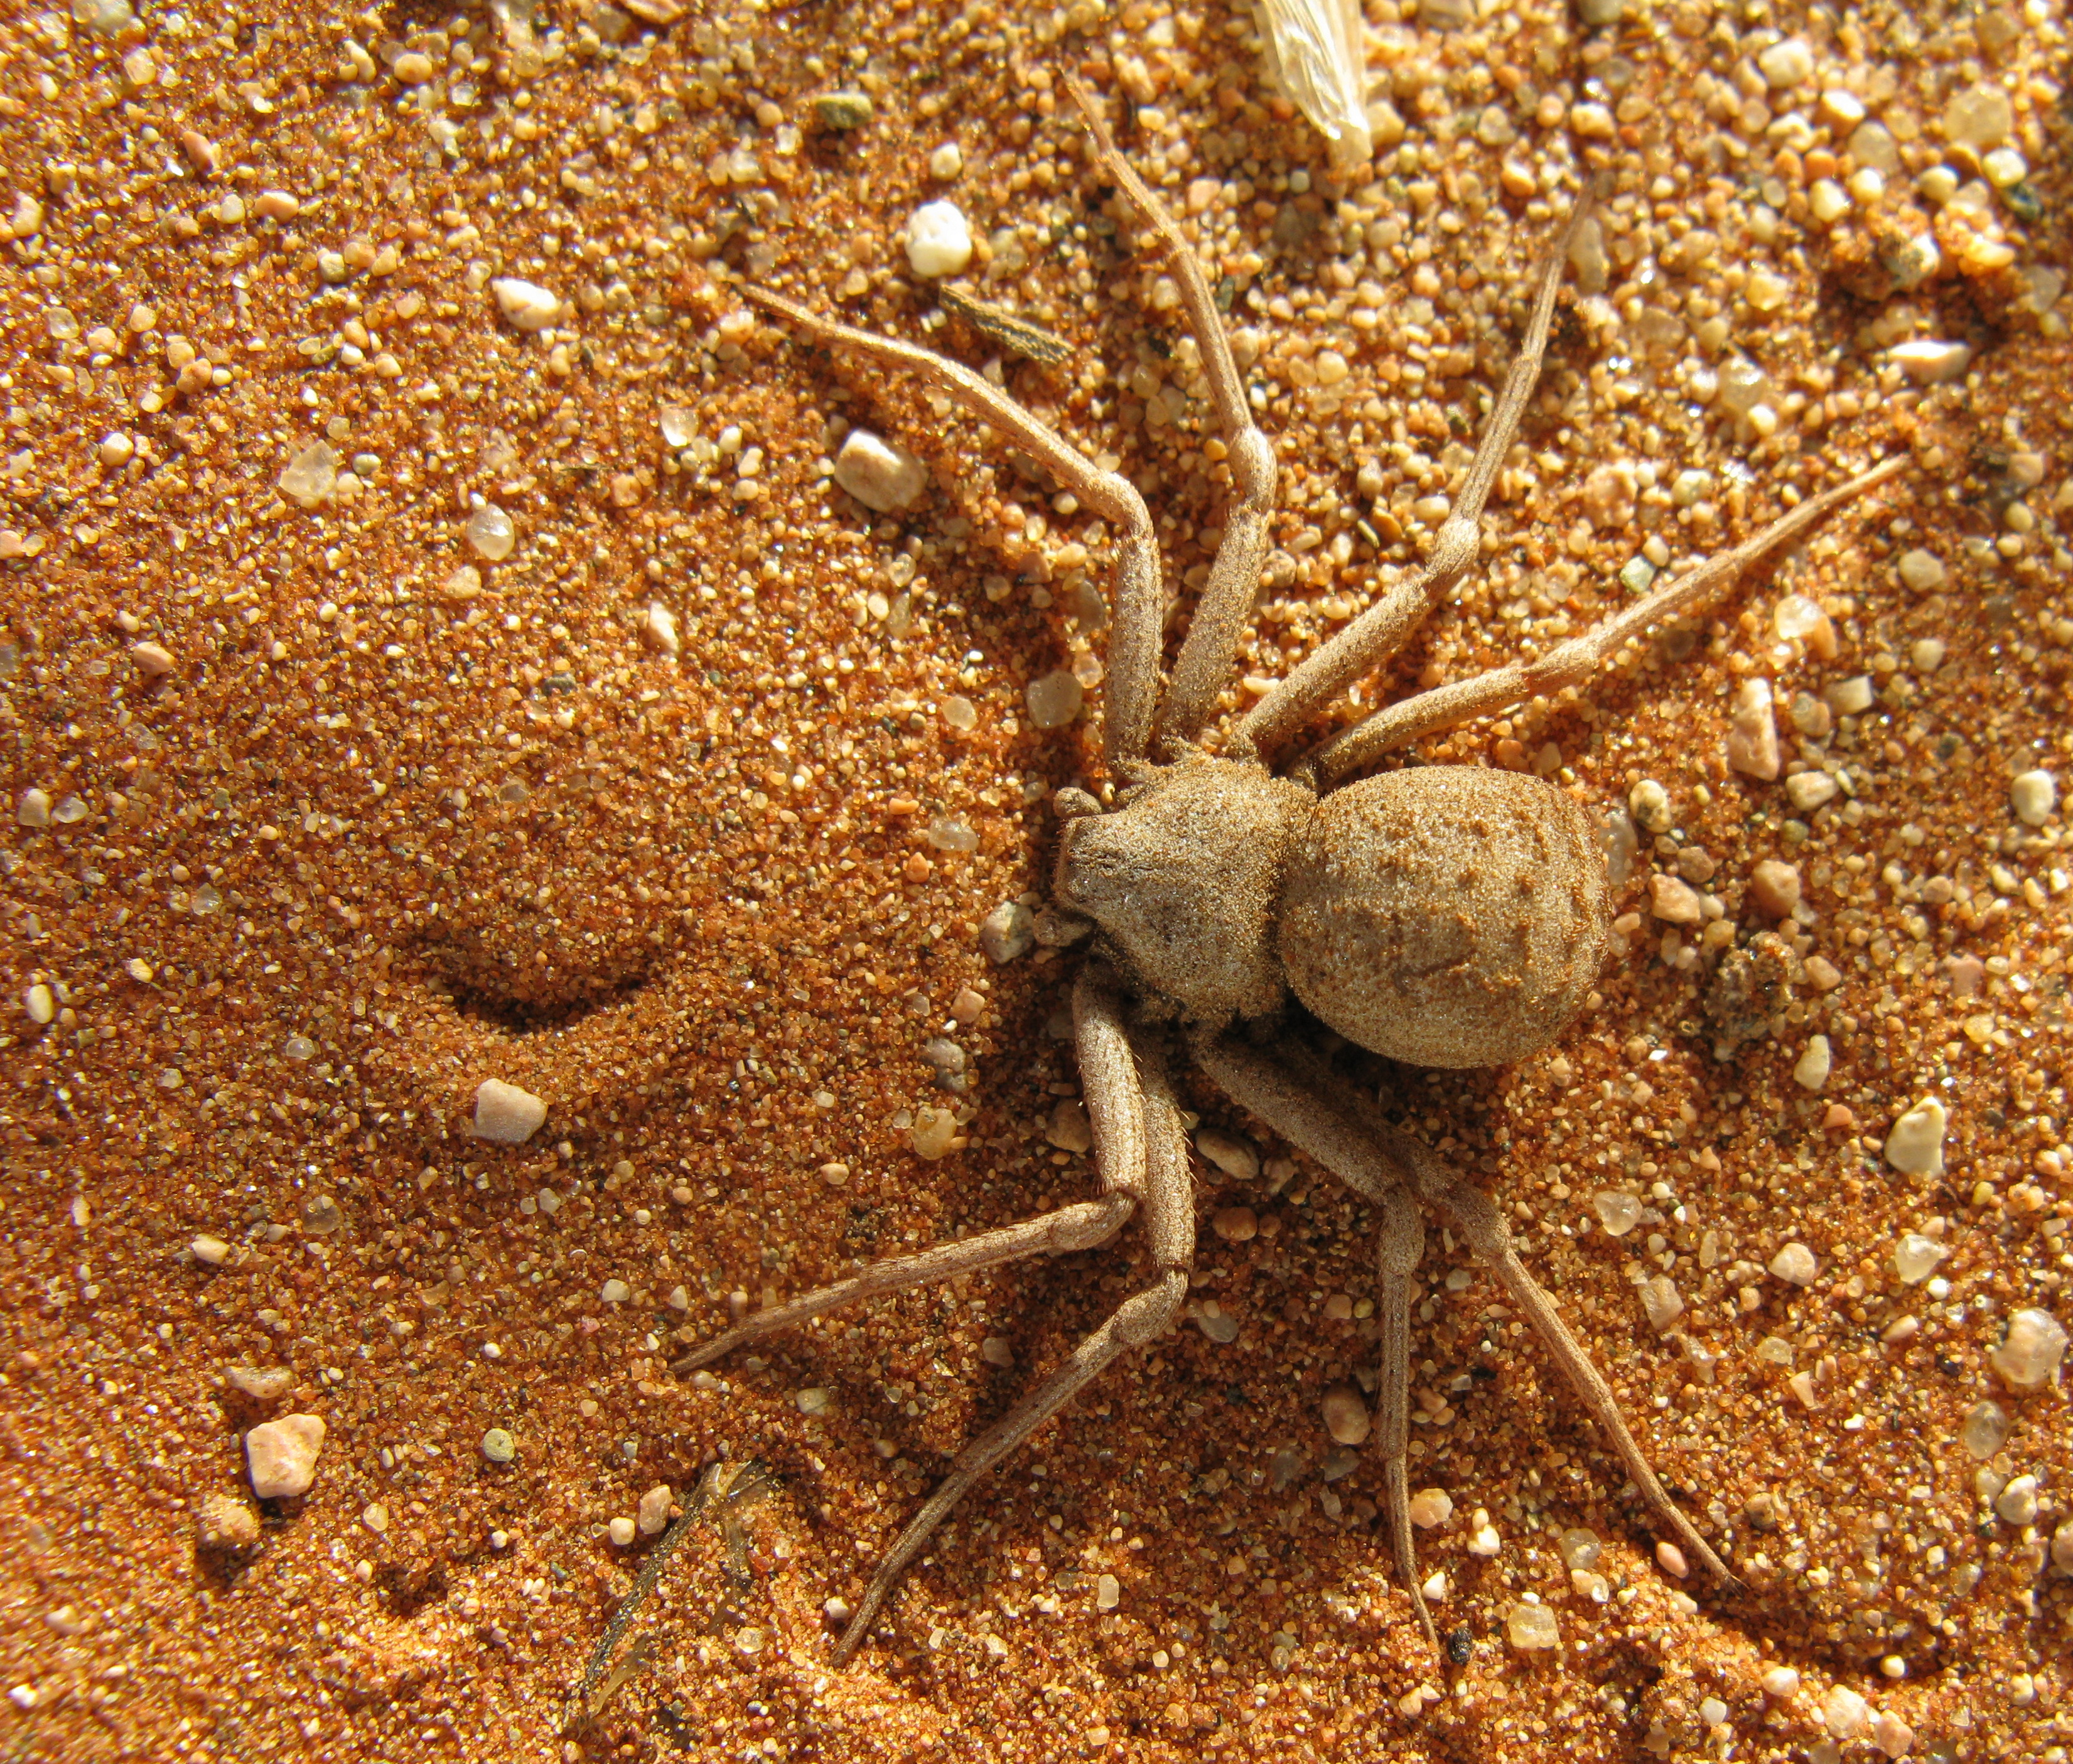 A six eyed sand spider walking on sand